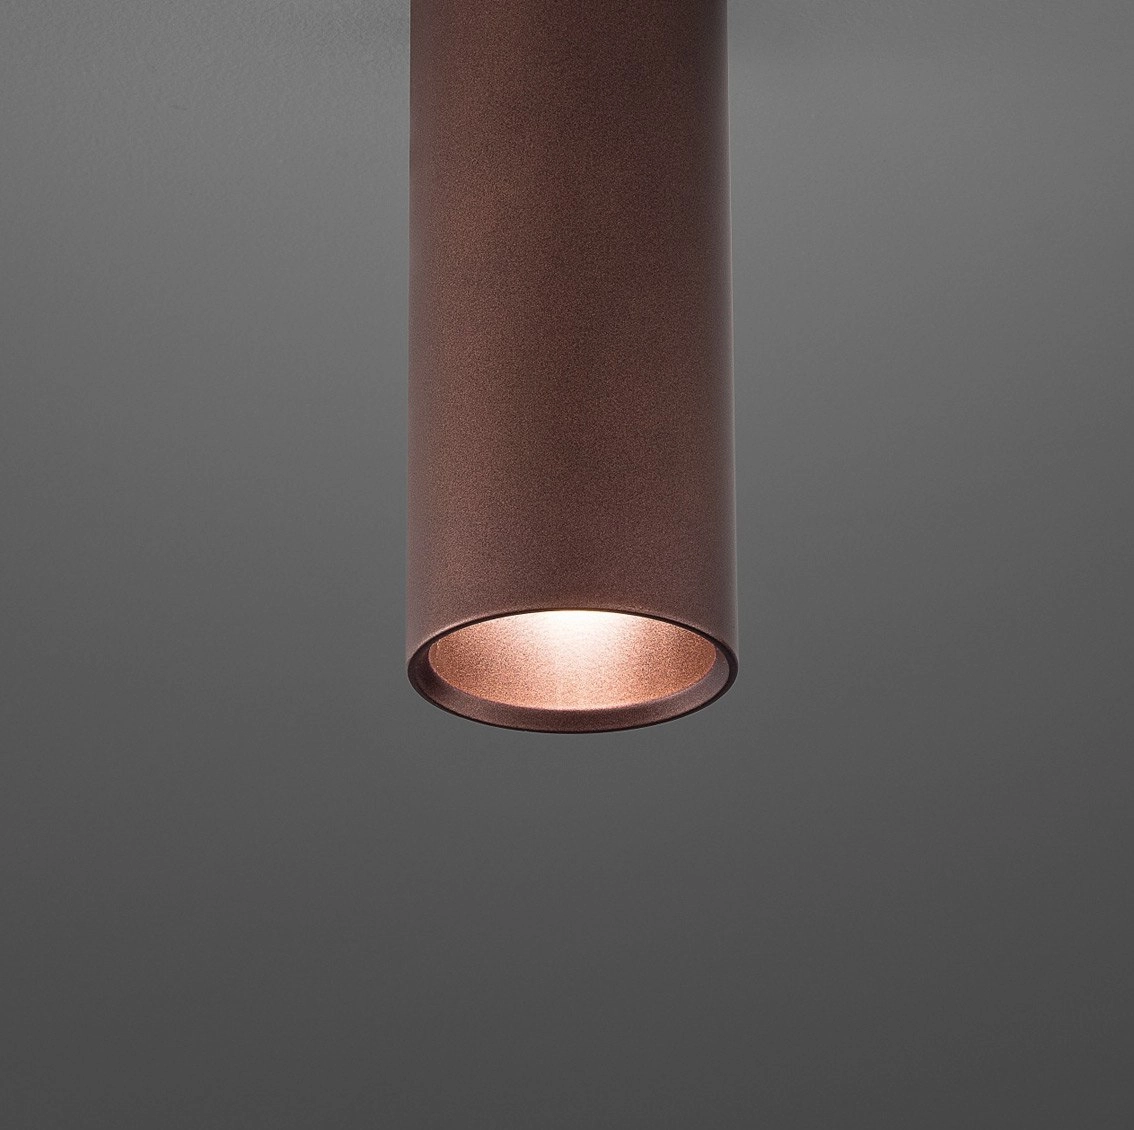 A-Tube Large cylinder light by Lodes